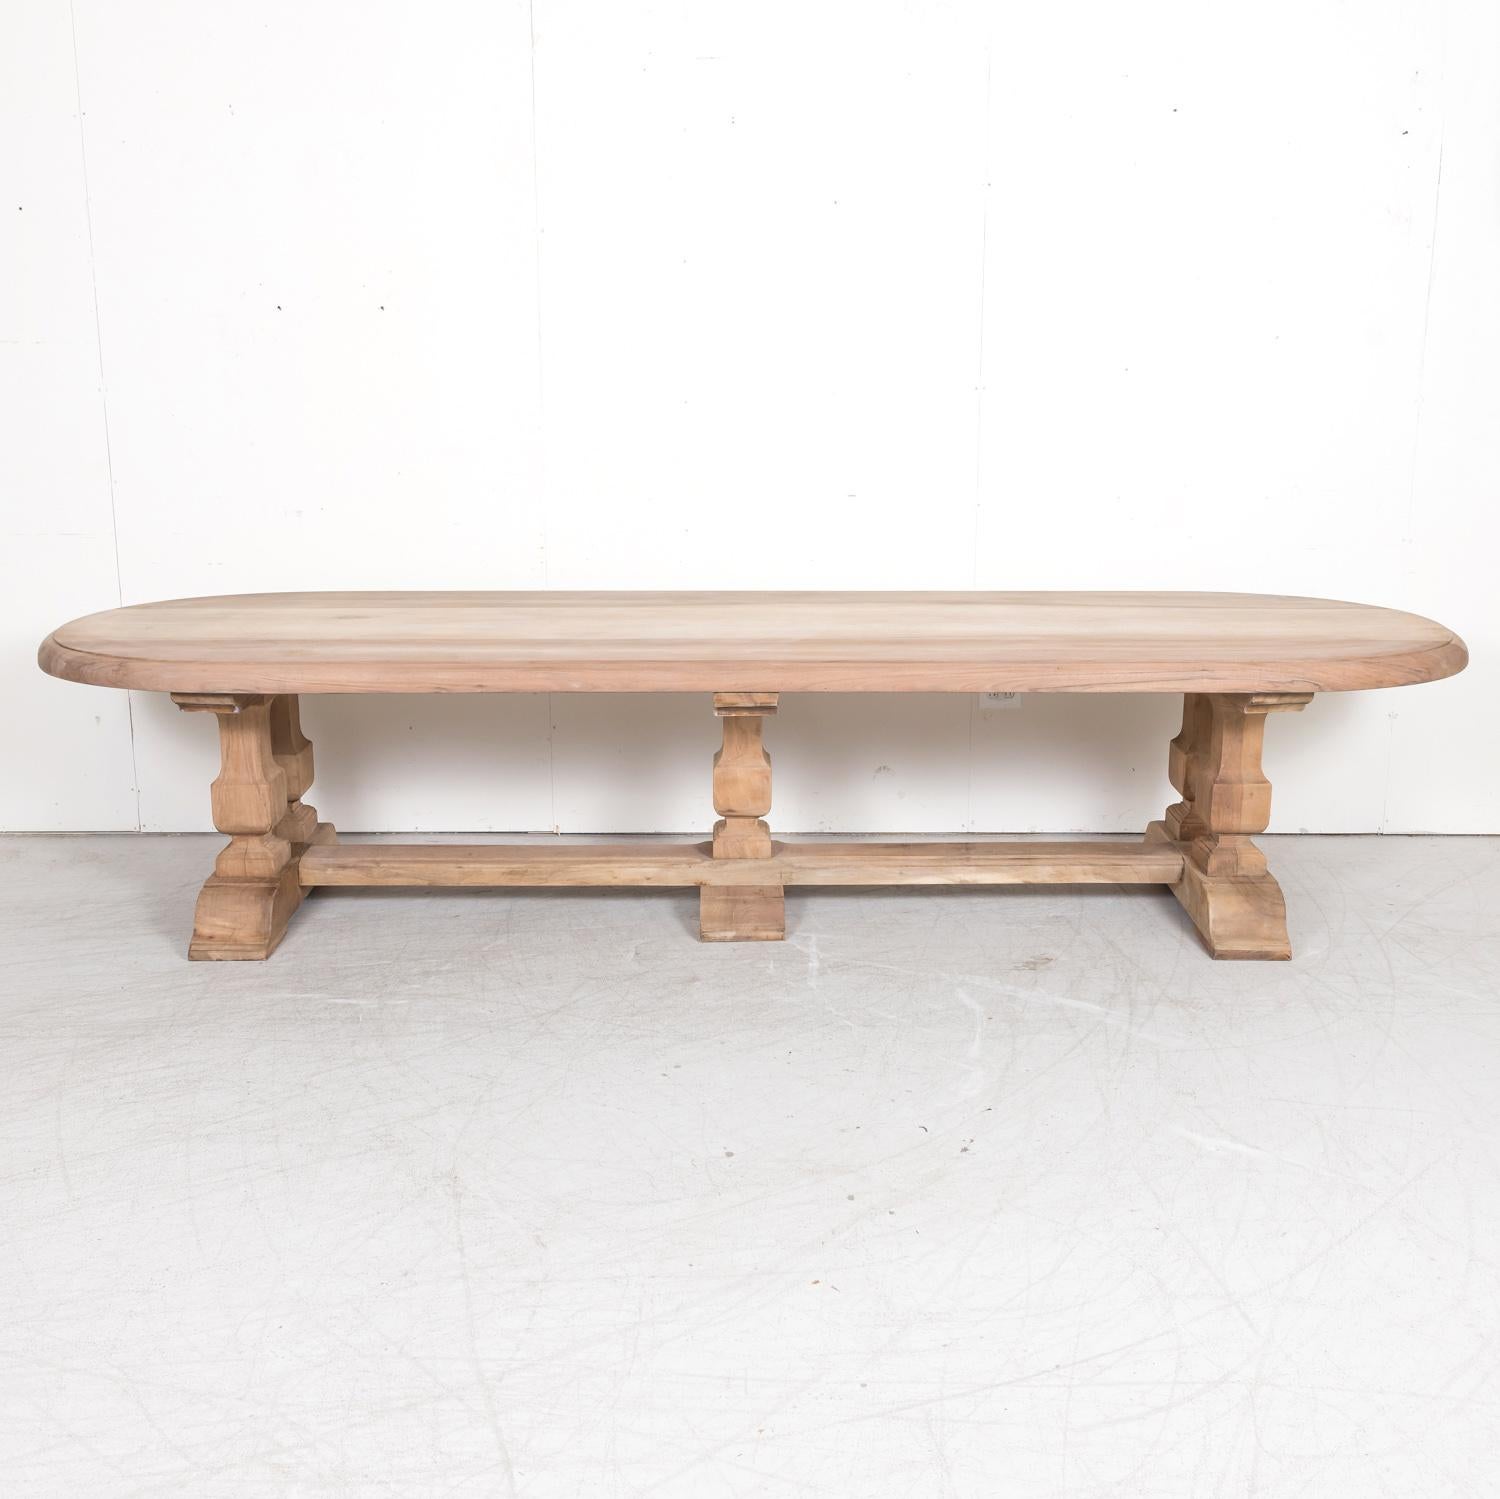 Impressive Antique French Bleached Walnut Trestle Dining Table with Rounded Ends 11